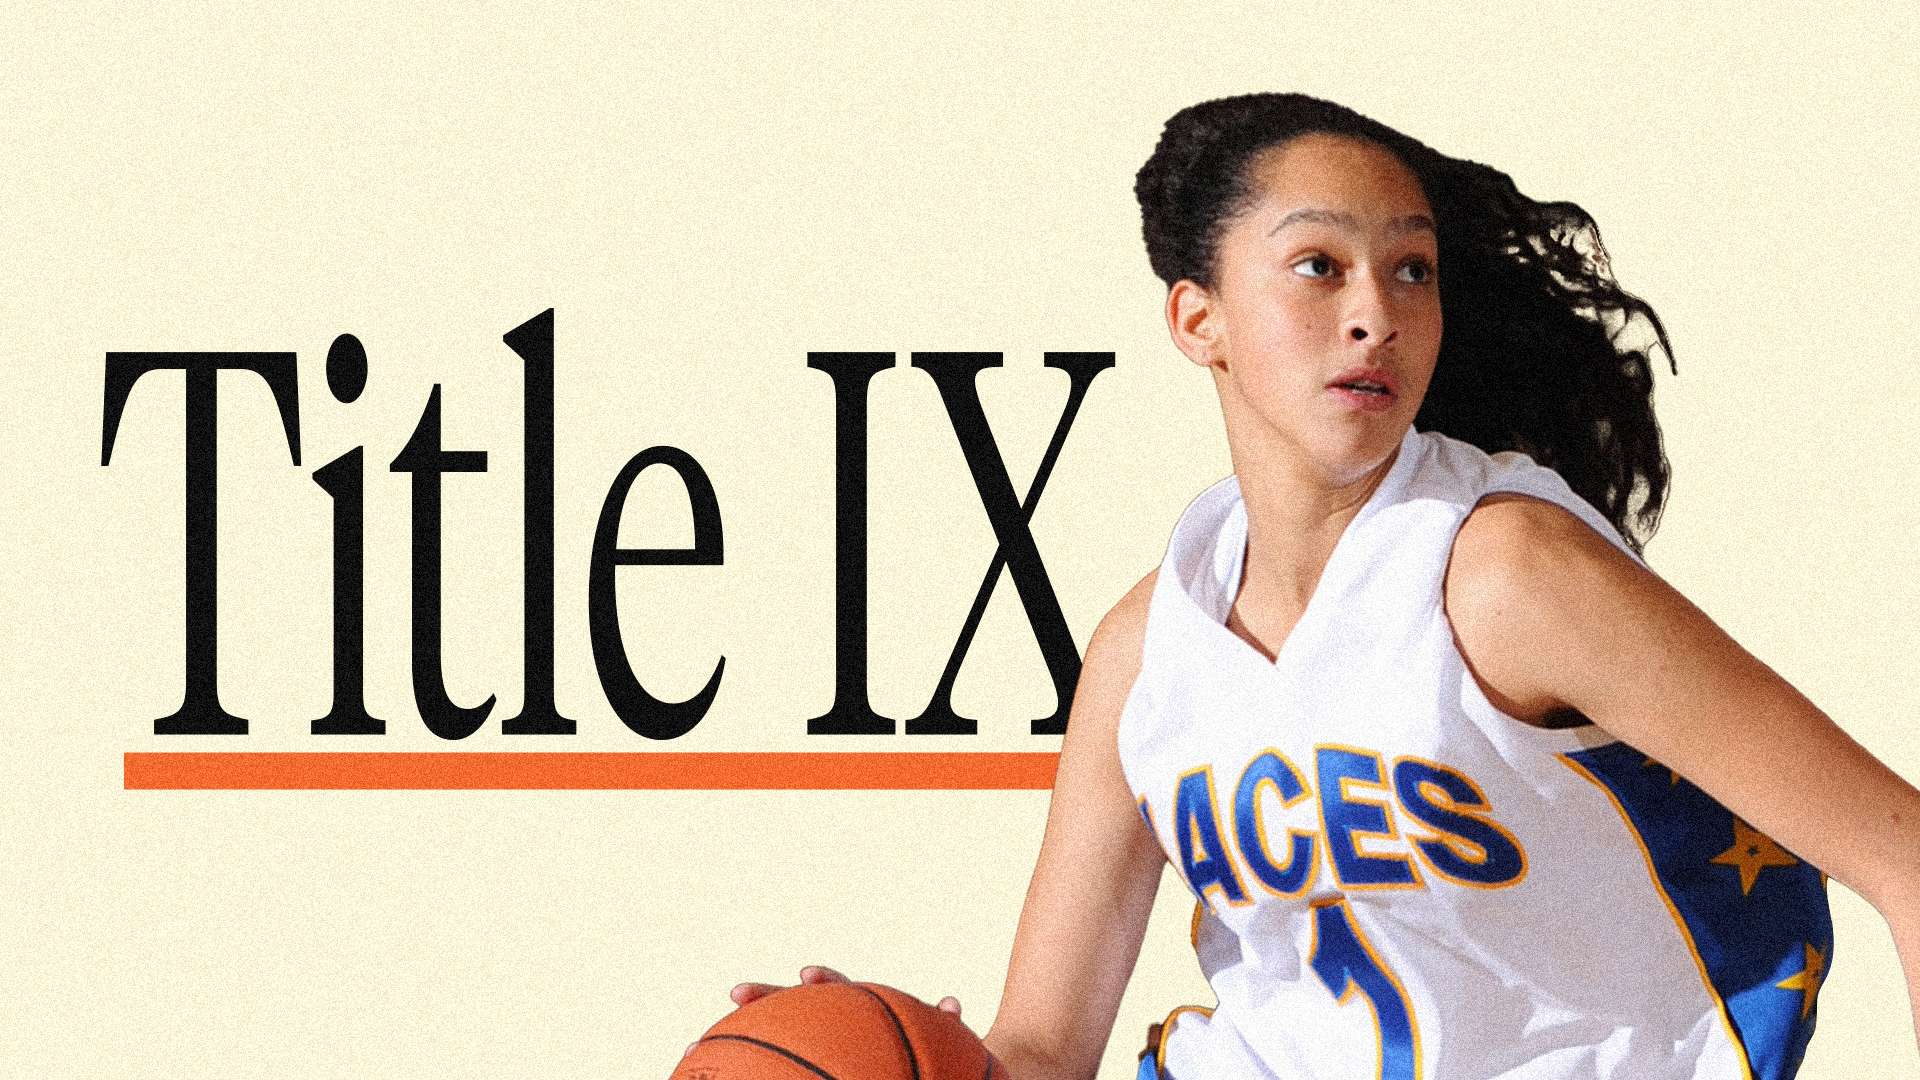 Which Women's Sports Benefited The Most From Title IX?